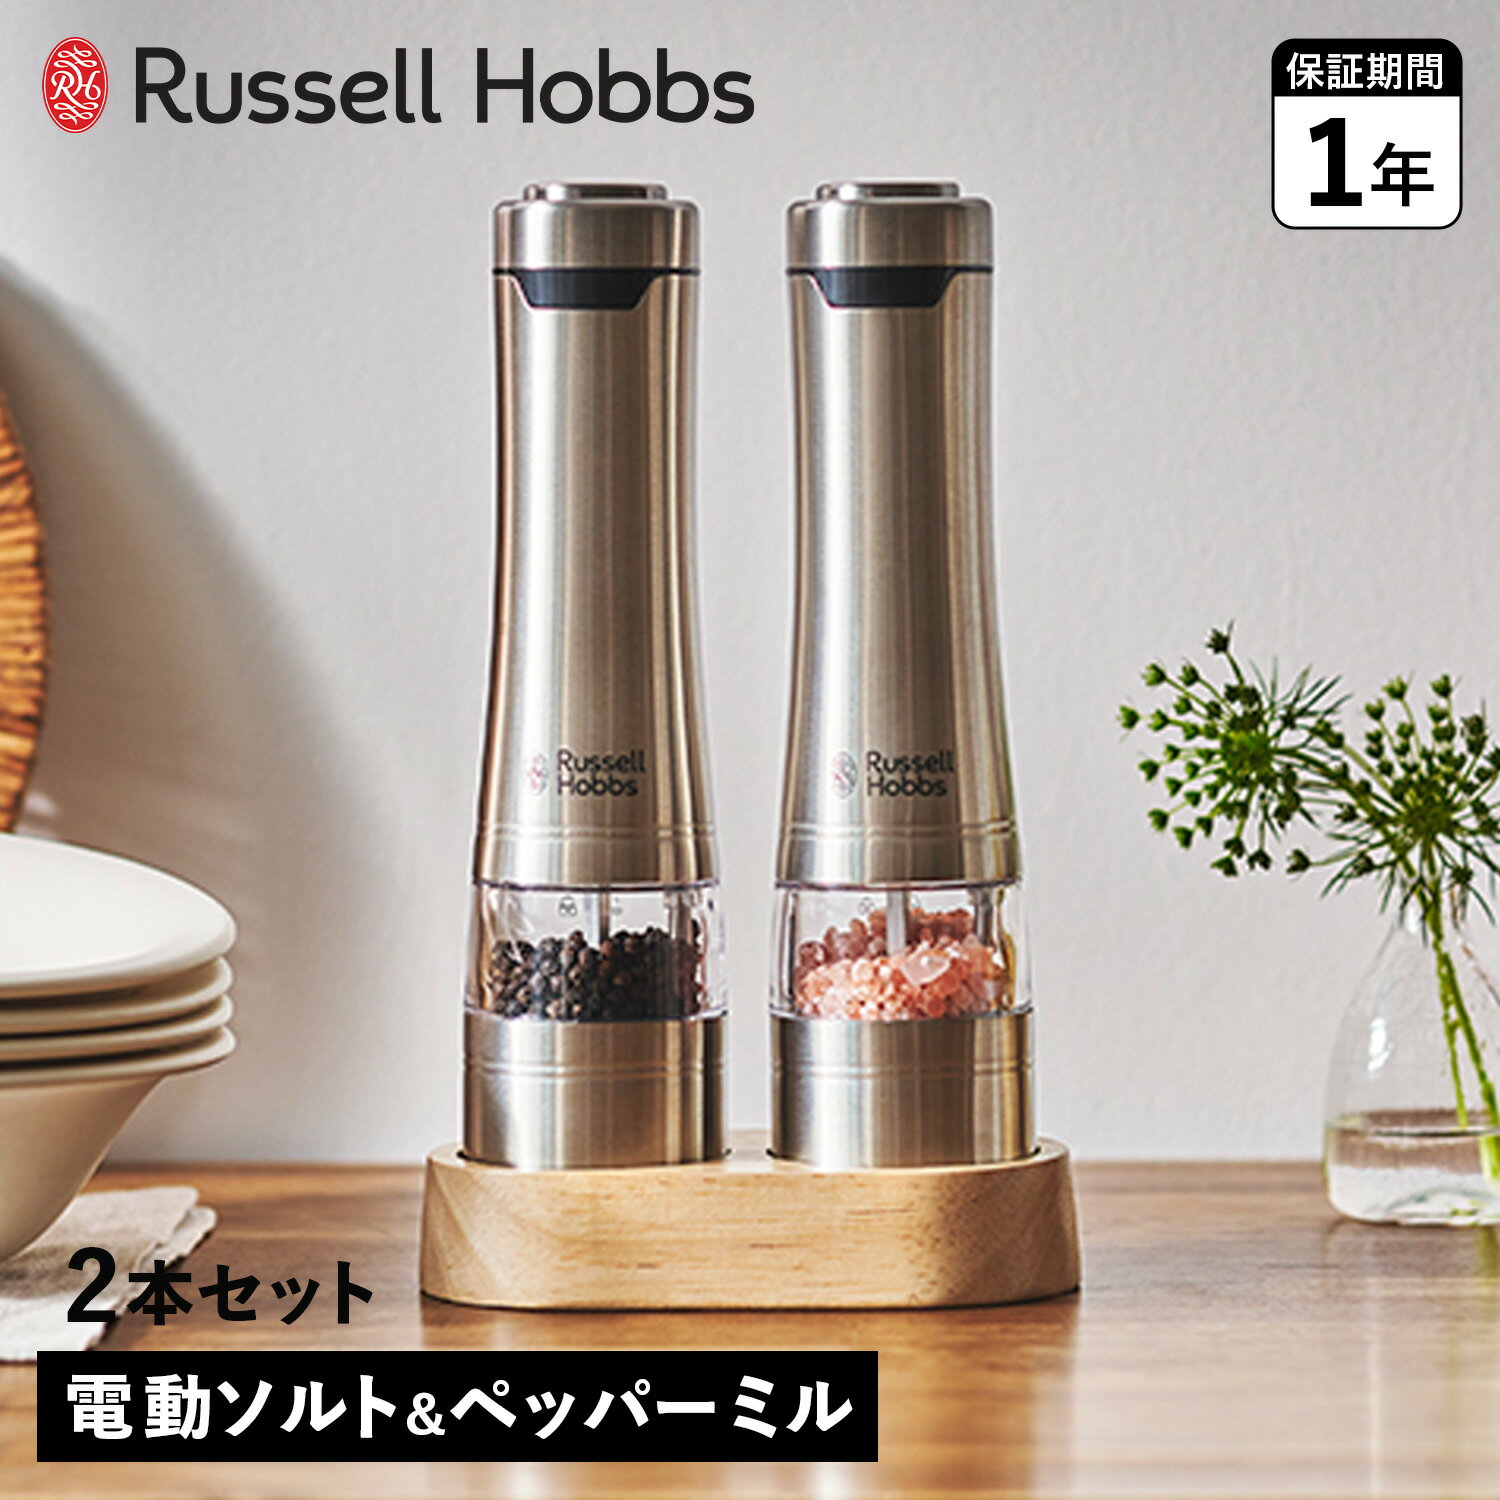 Russell Hobbs bZzuX d~ \g&ybp[ dybp[~ d\g~ 2{ EbhX^h Zbg y ELECTRIC MILL WOOD STAND SET 7923JP